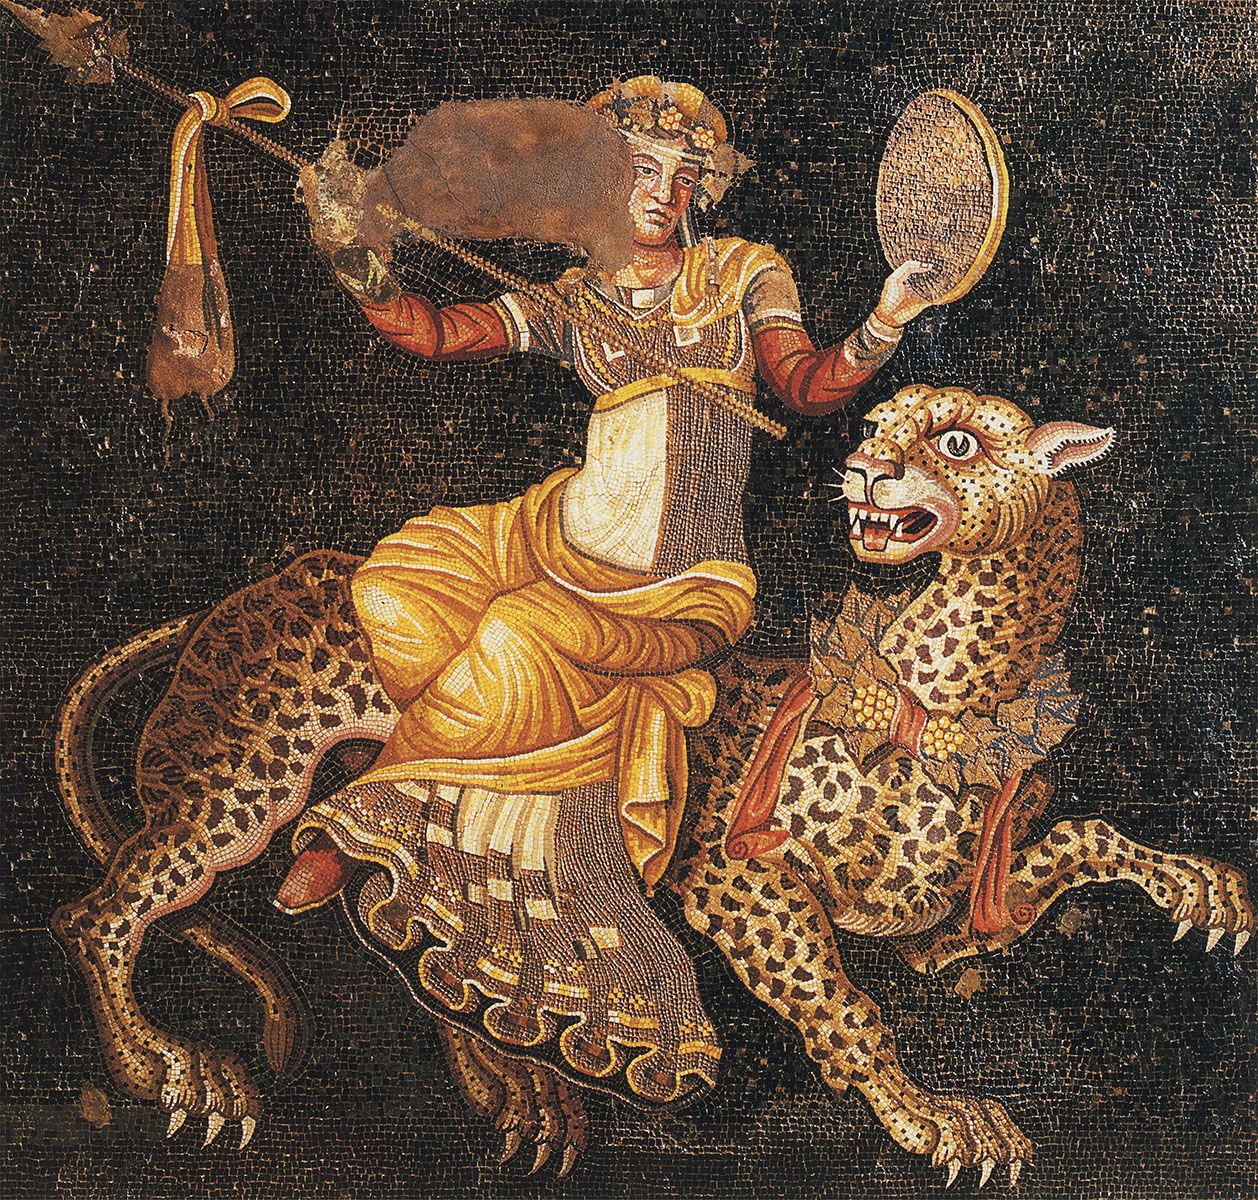 Dionysos riding panther, Delos, House of Masks.jpg